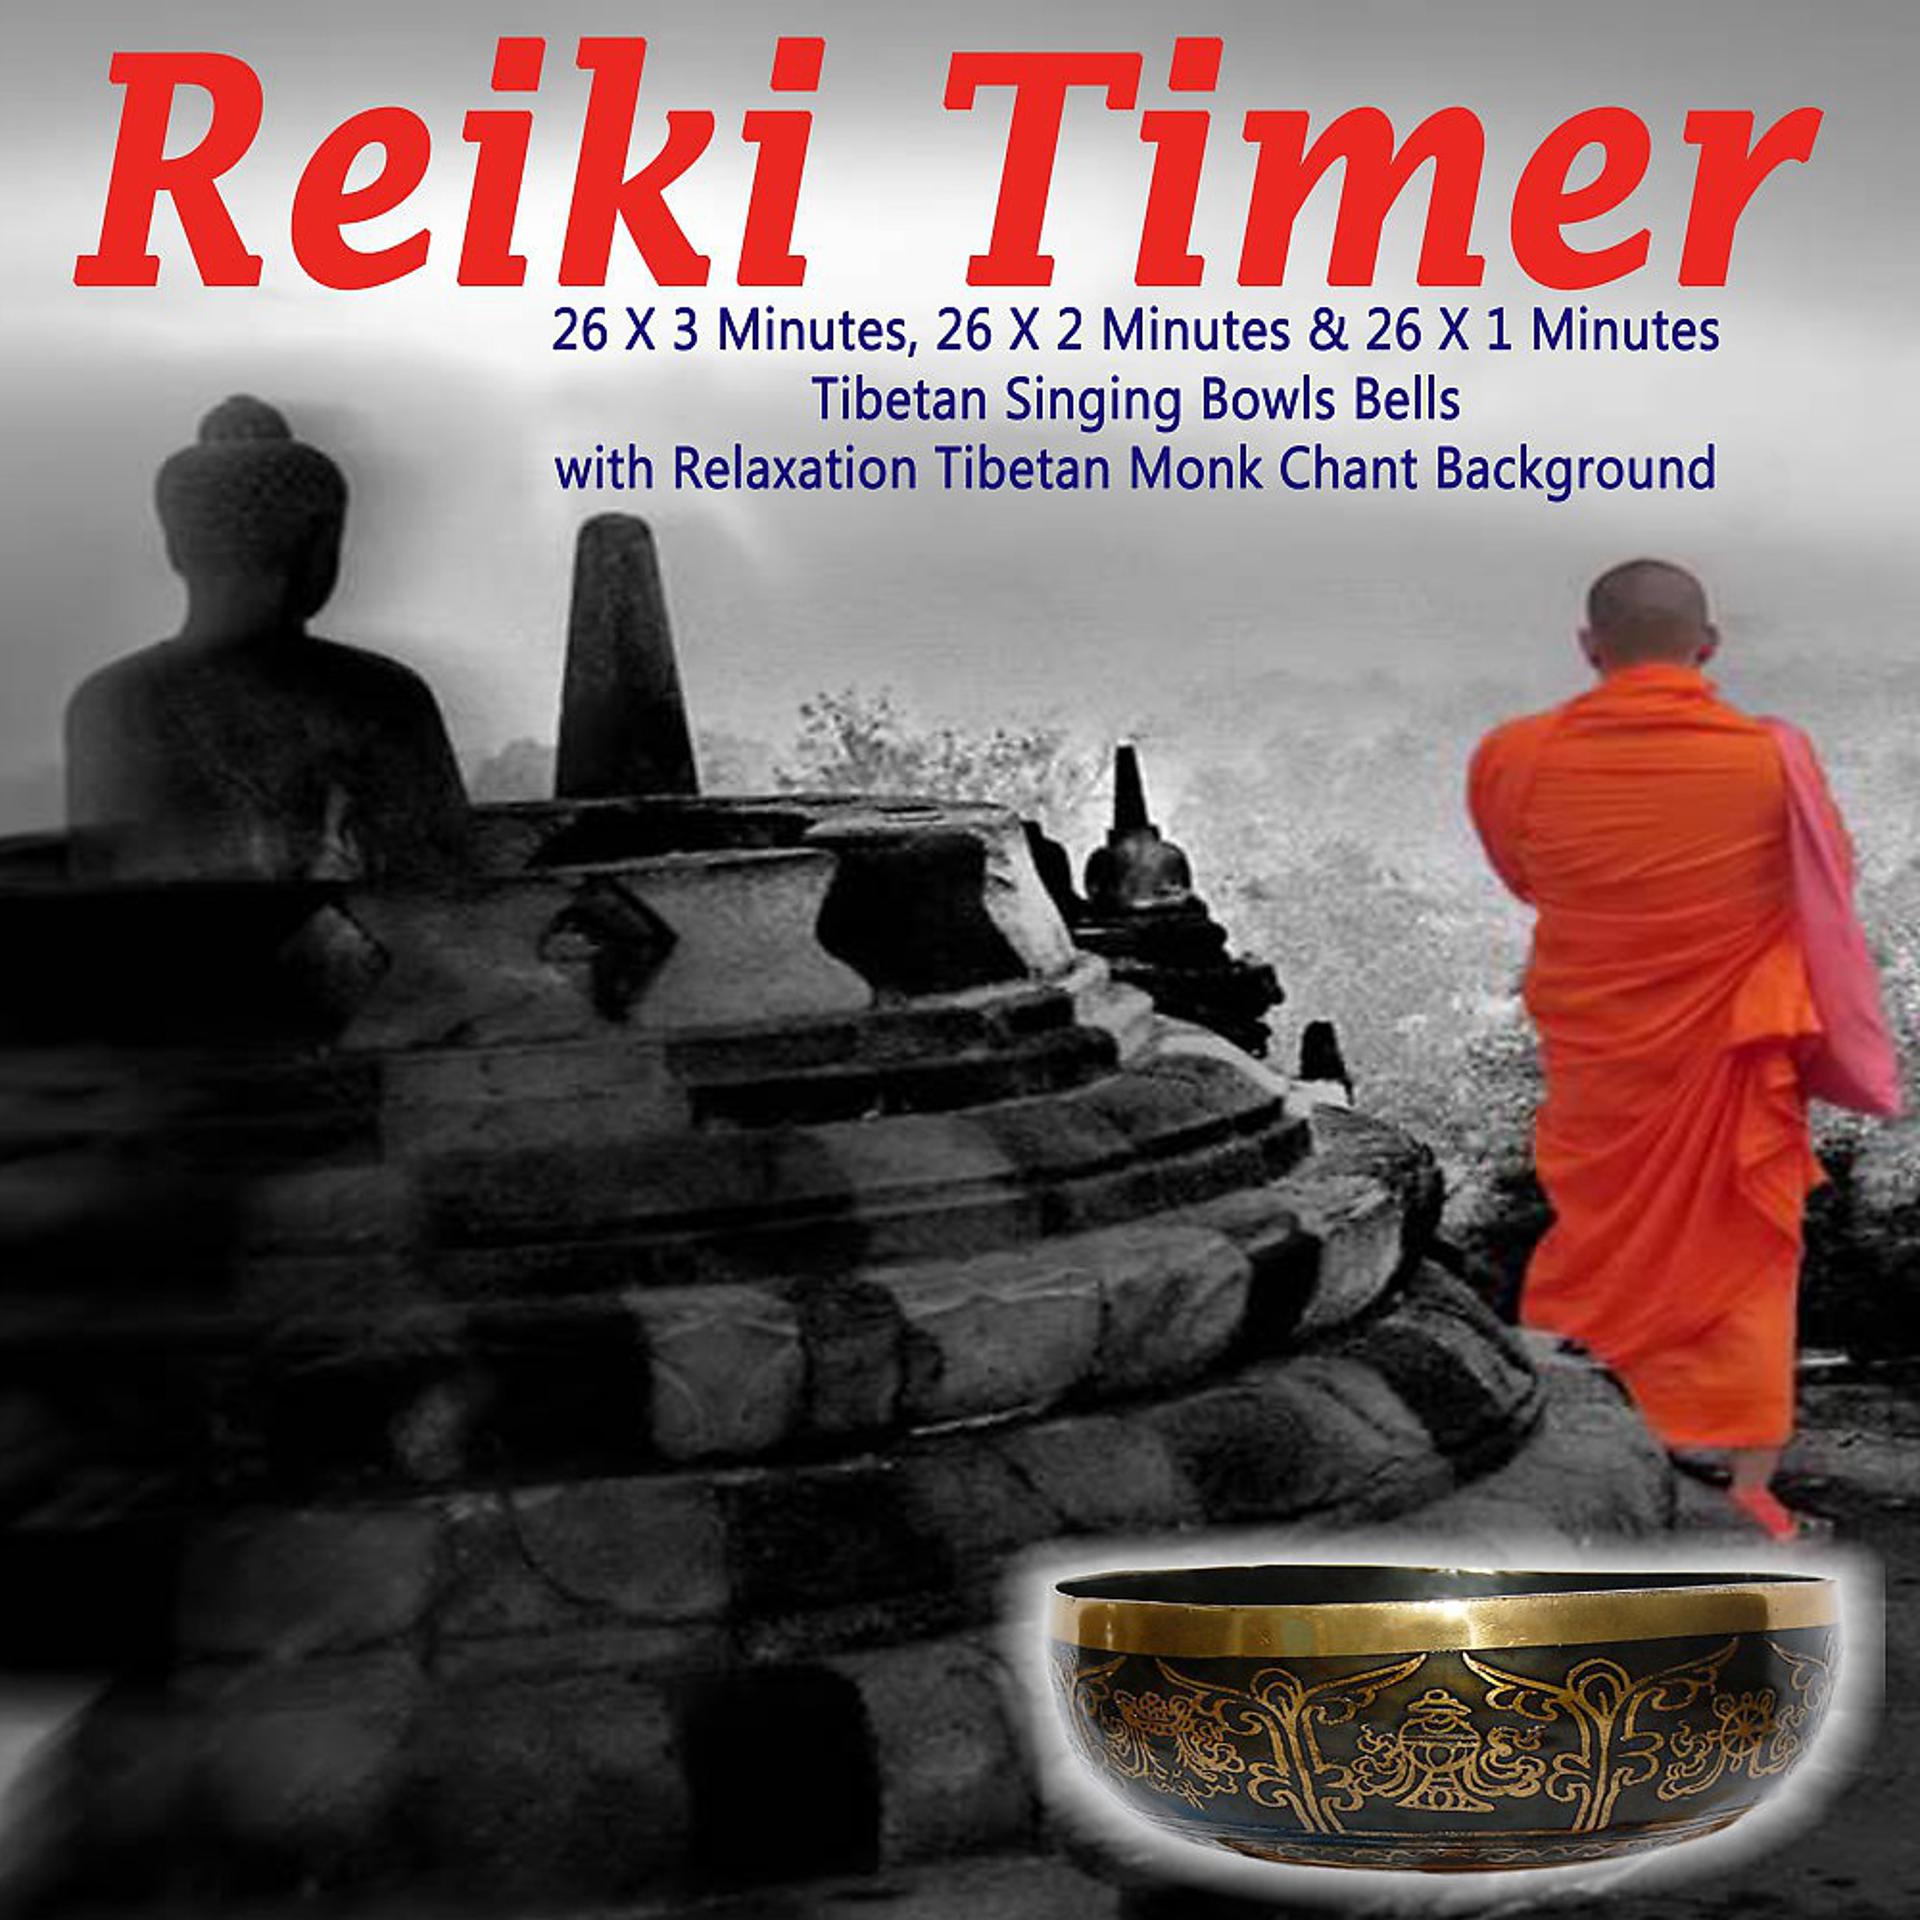 Постер альбома Reiki Timer - 26 X 3 Minutes, 26 X 2 Minutes & 26 X 1 Minute Tibetan Singing Bowls Bells with Relaxation Tibetan Monk Chant Background